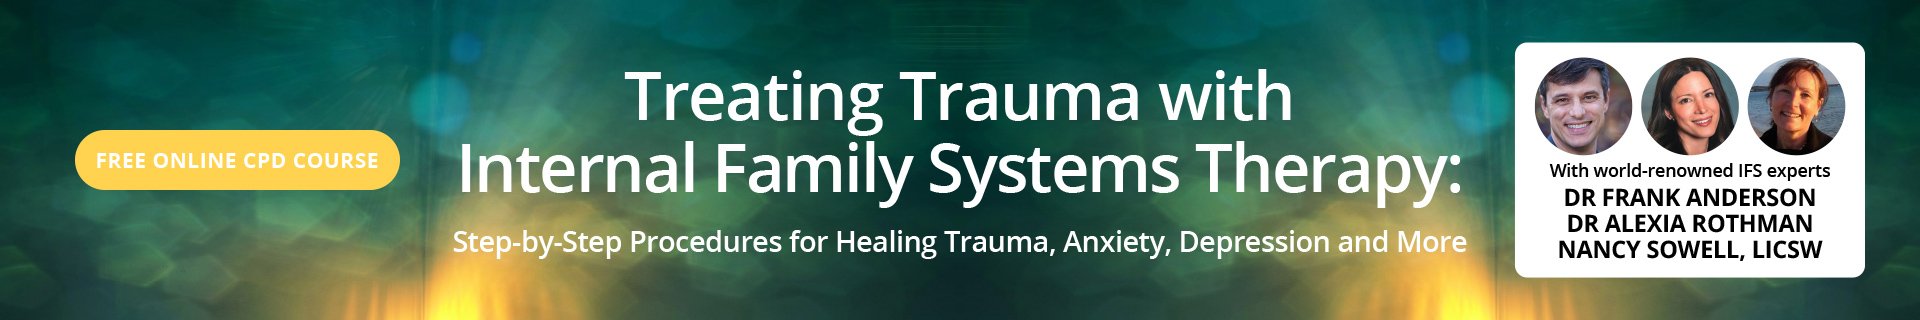 Treating Trauma with Internal Family Systems Therapy: Step-by-step procedures for healing trauma, anxiety, depression and more